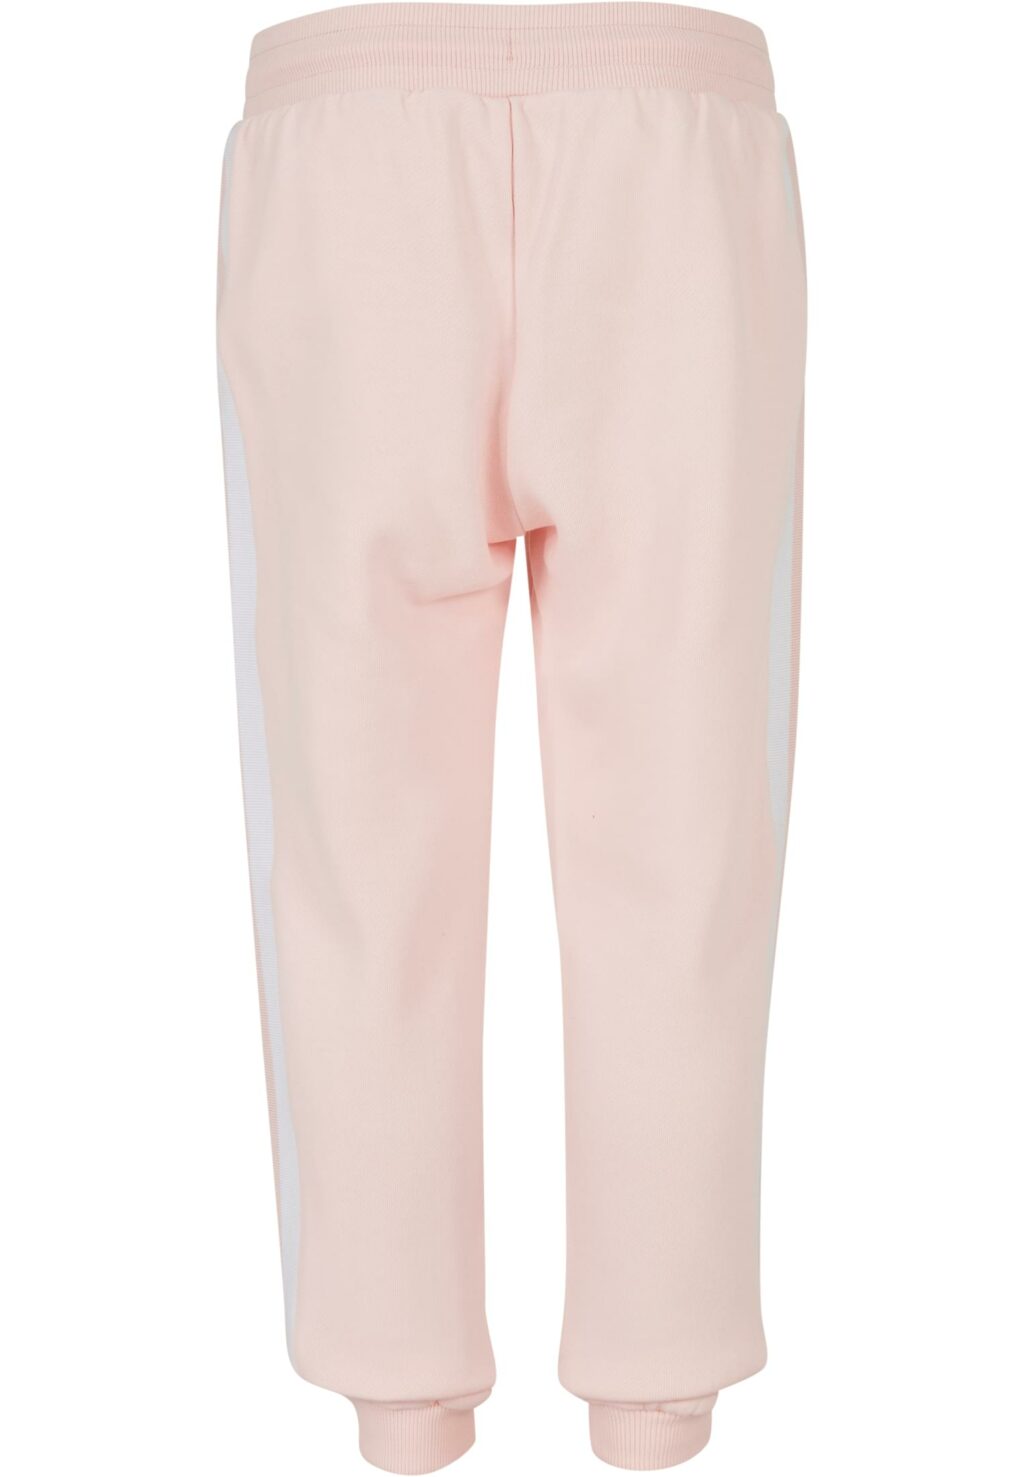 Girls College Contrast Sweatpants pink/white/pink UCK2453